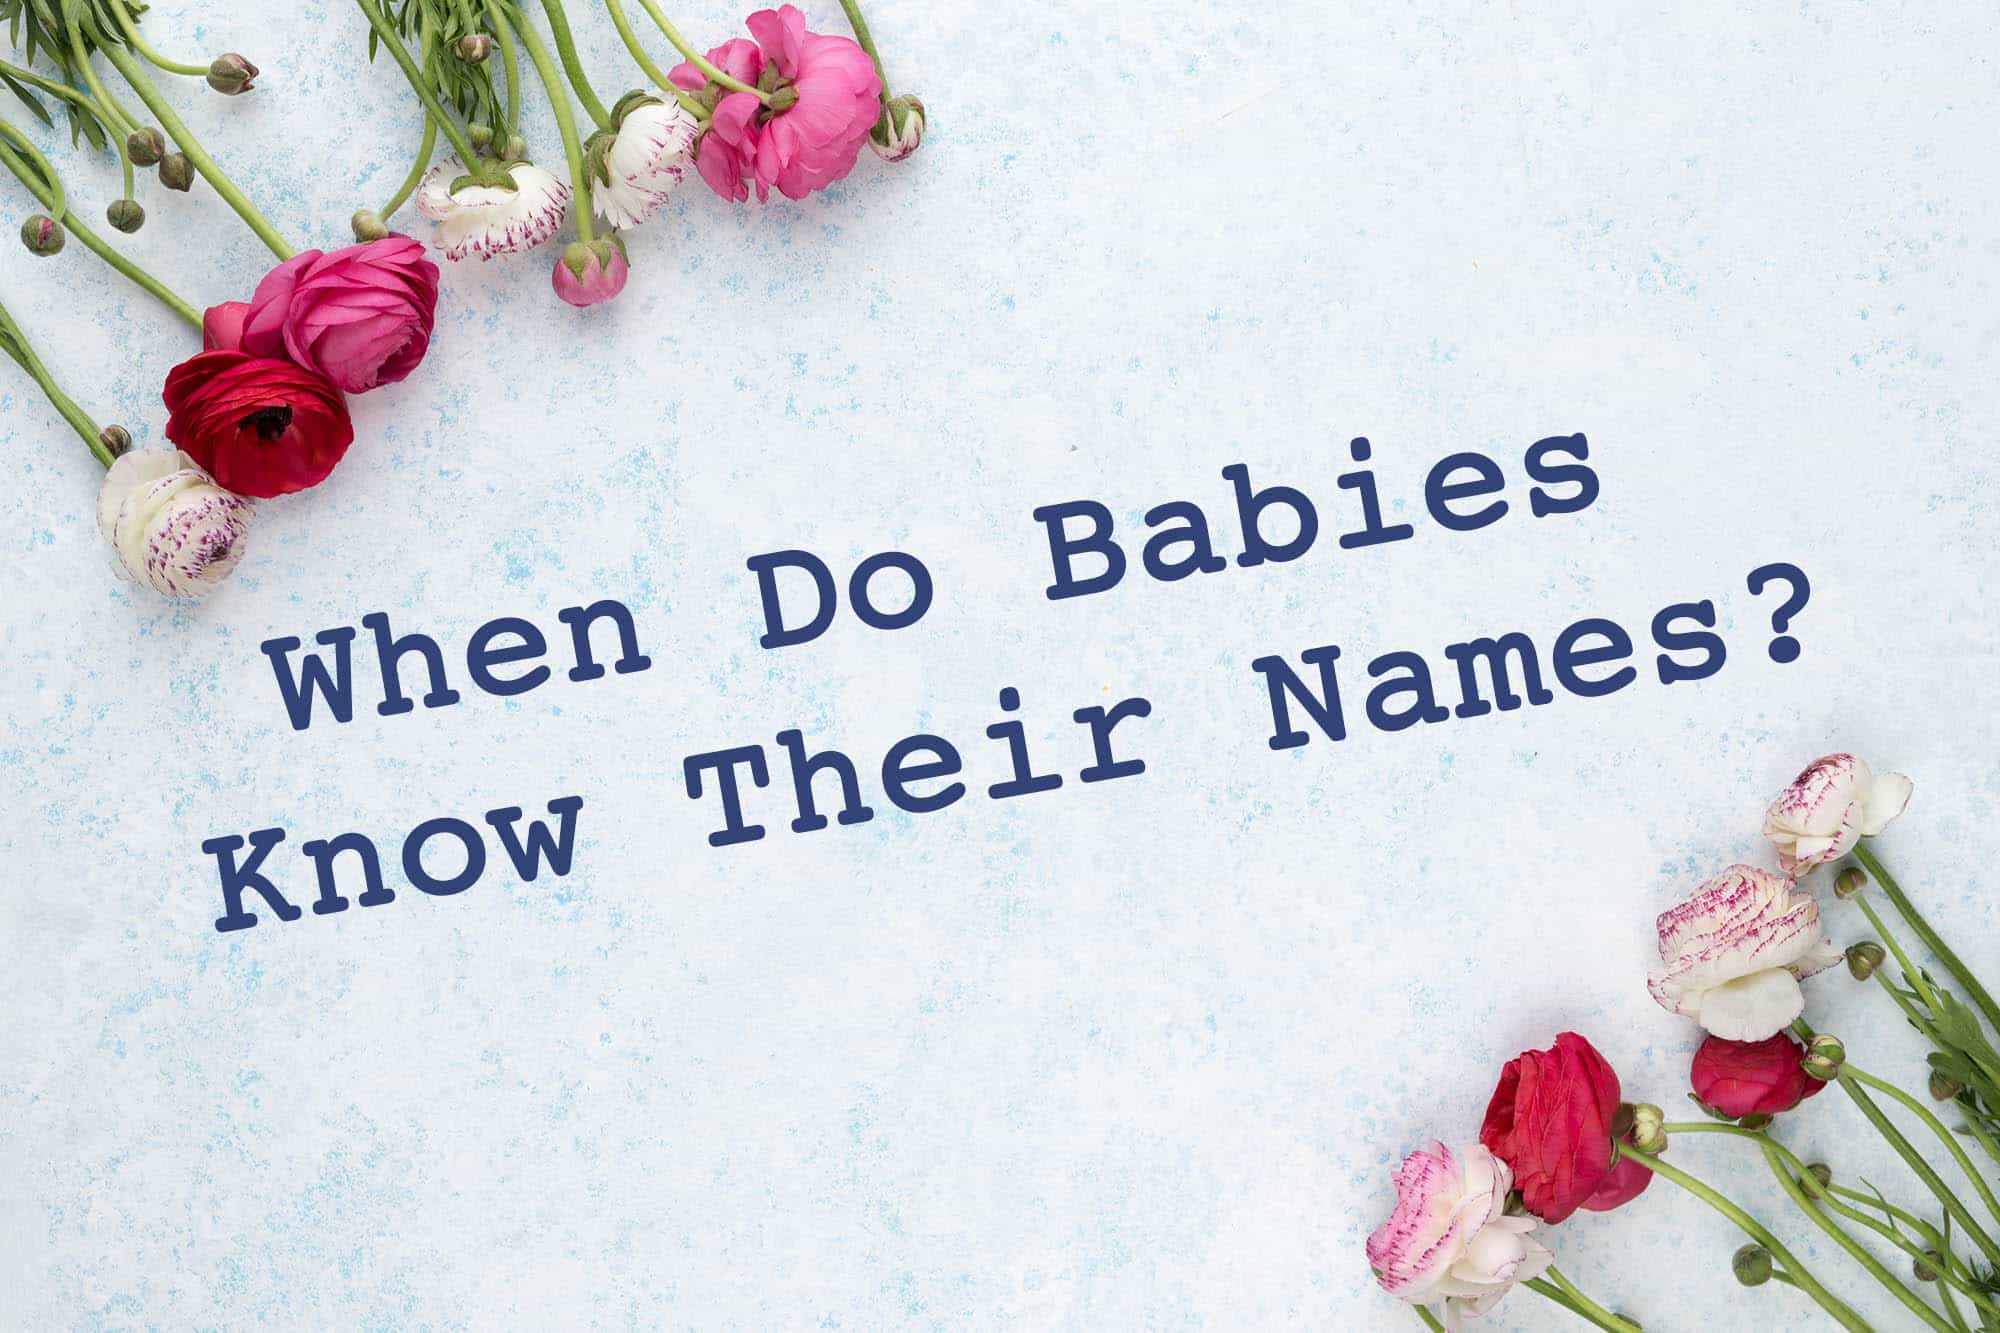 When Do Babies Know Their Names? – Very Many Names